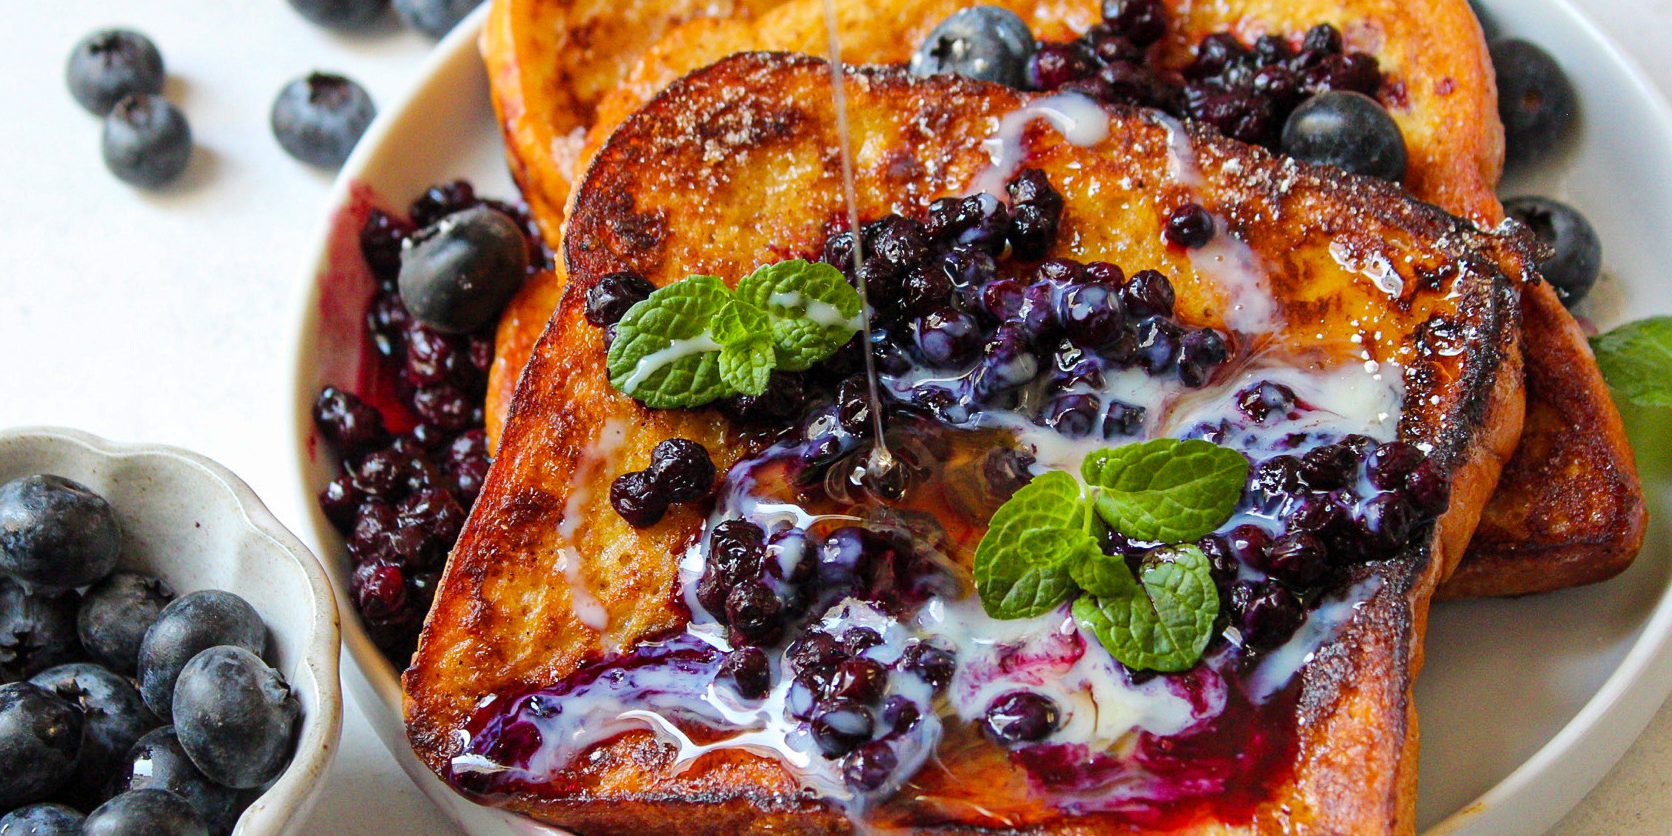 Cinnamon French Toast with Blueberry Brew Compote